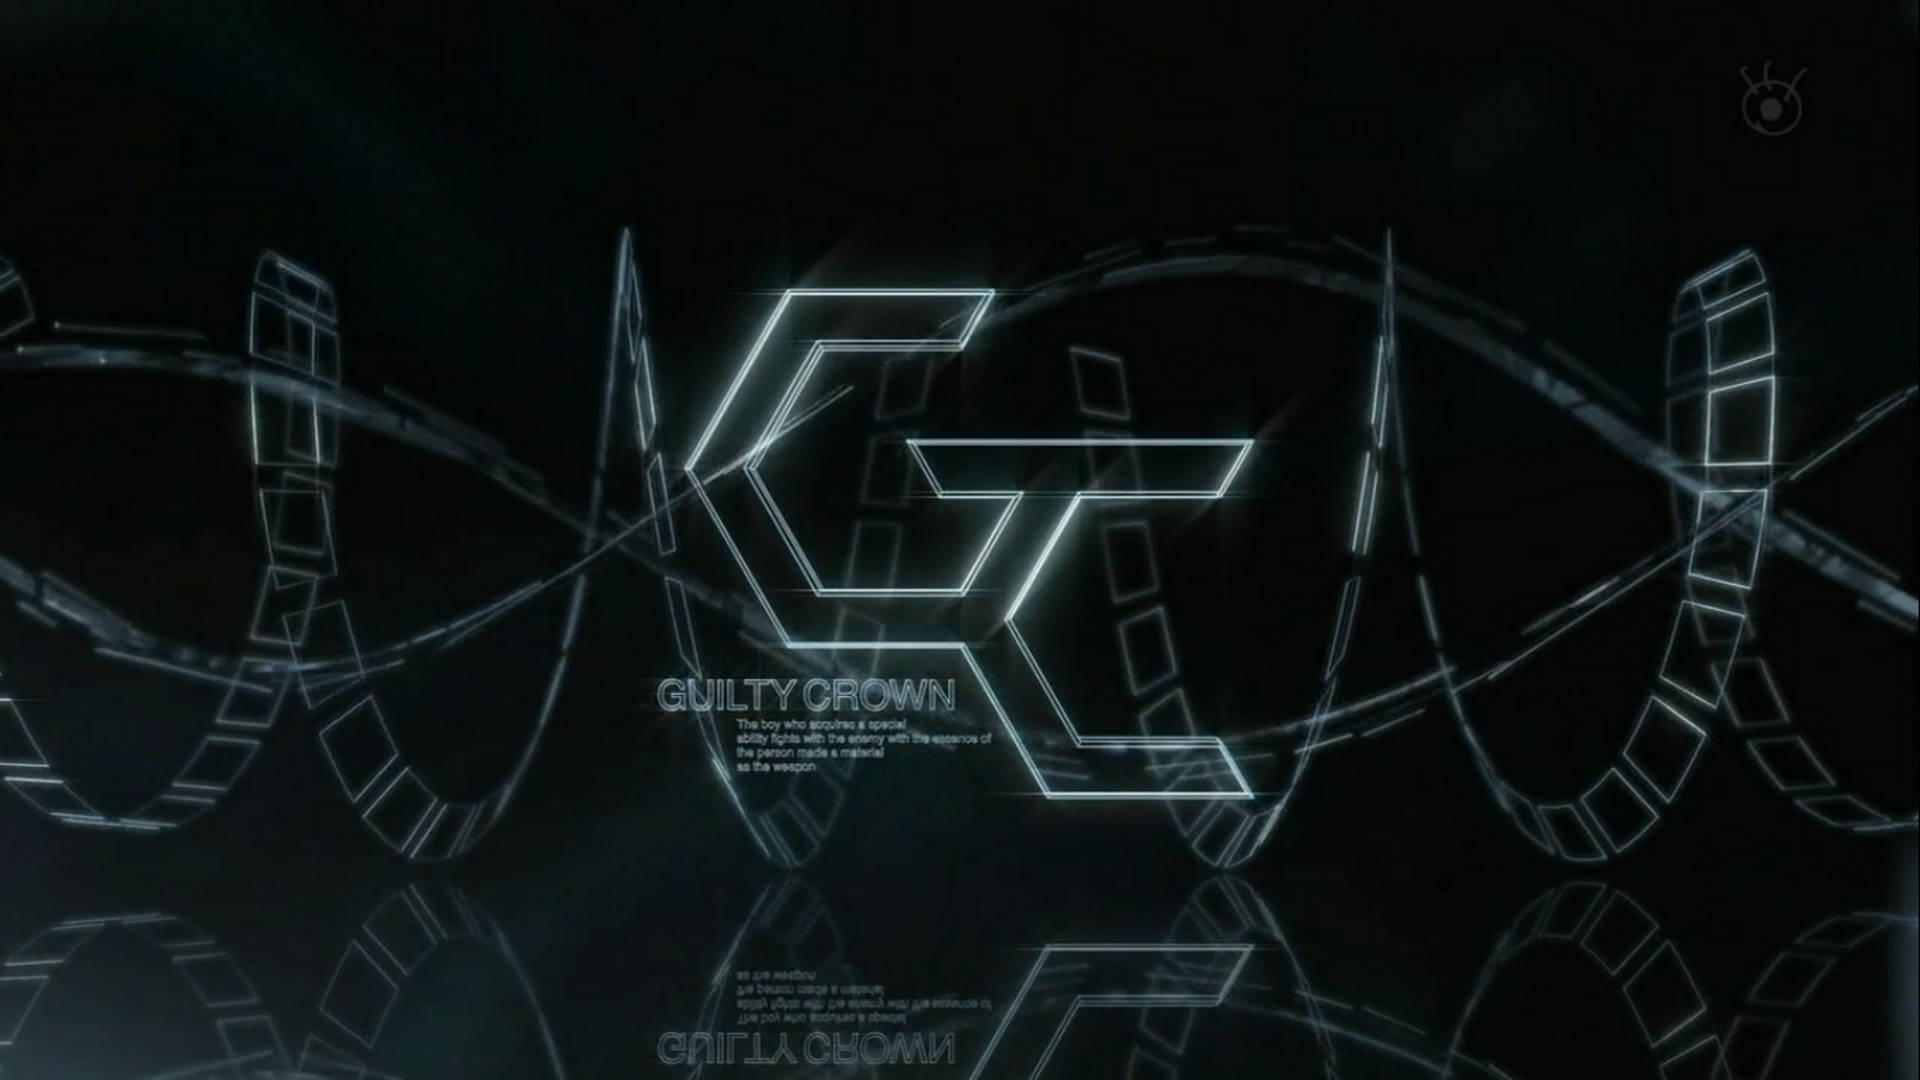 Guilty Crown Anime Logo Background